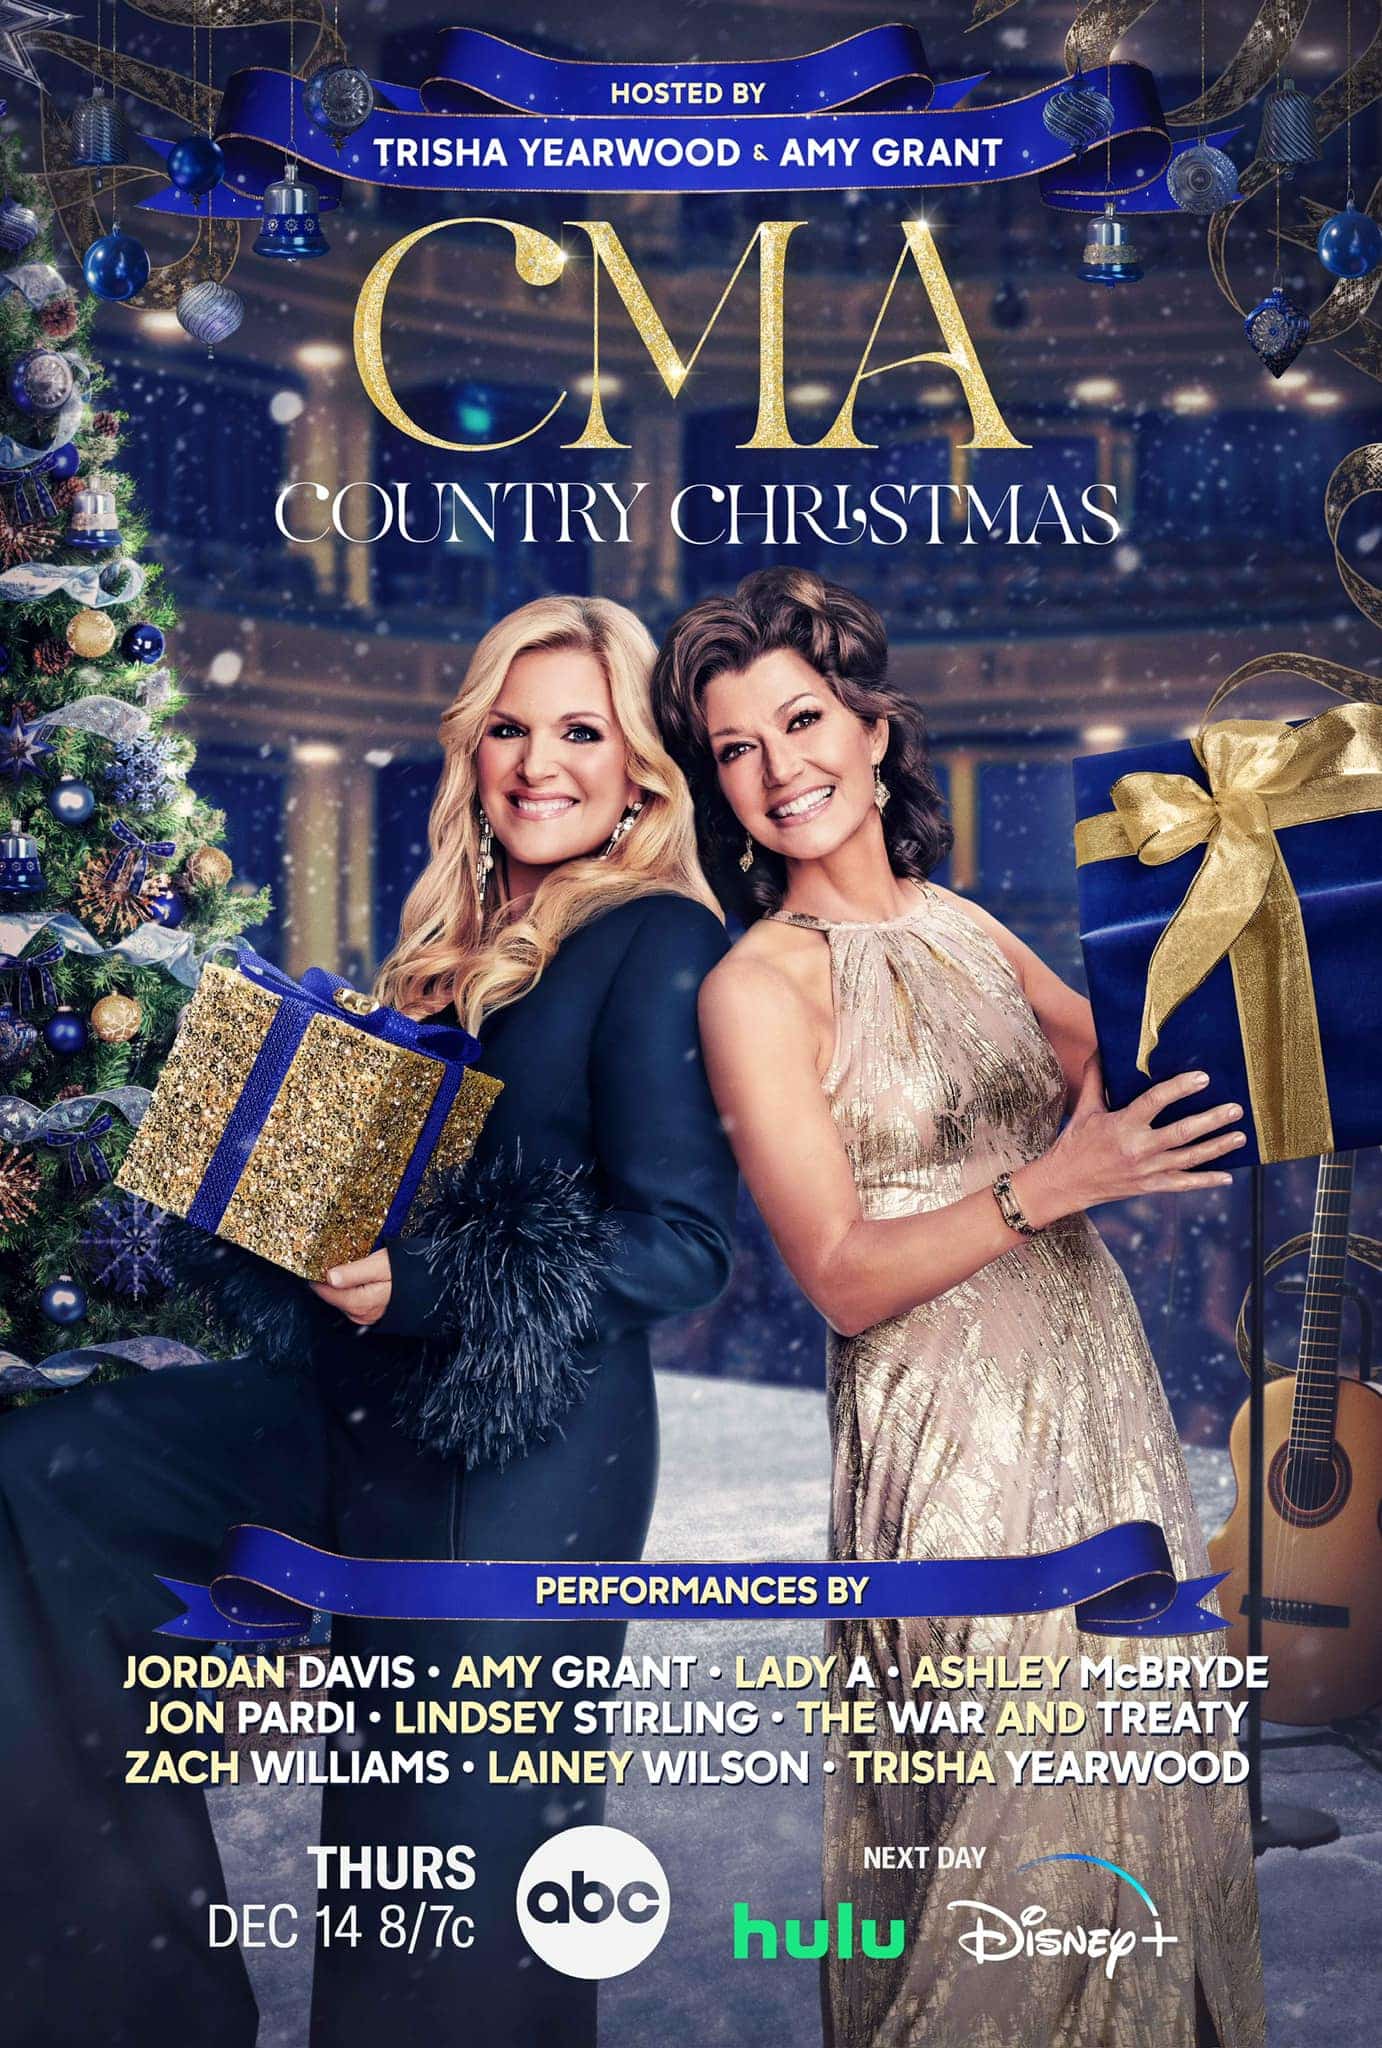 Trisha Yearwood and Amy Grant host the 2023 CMA Country Christmas special